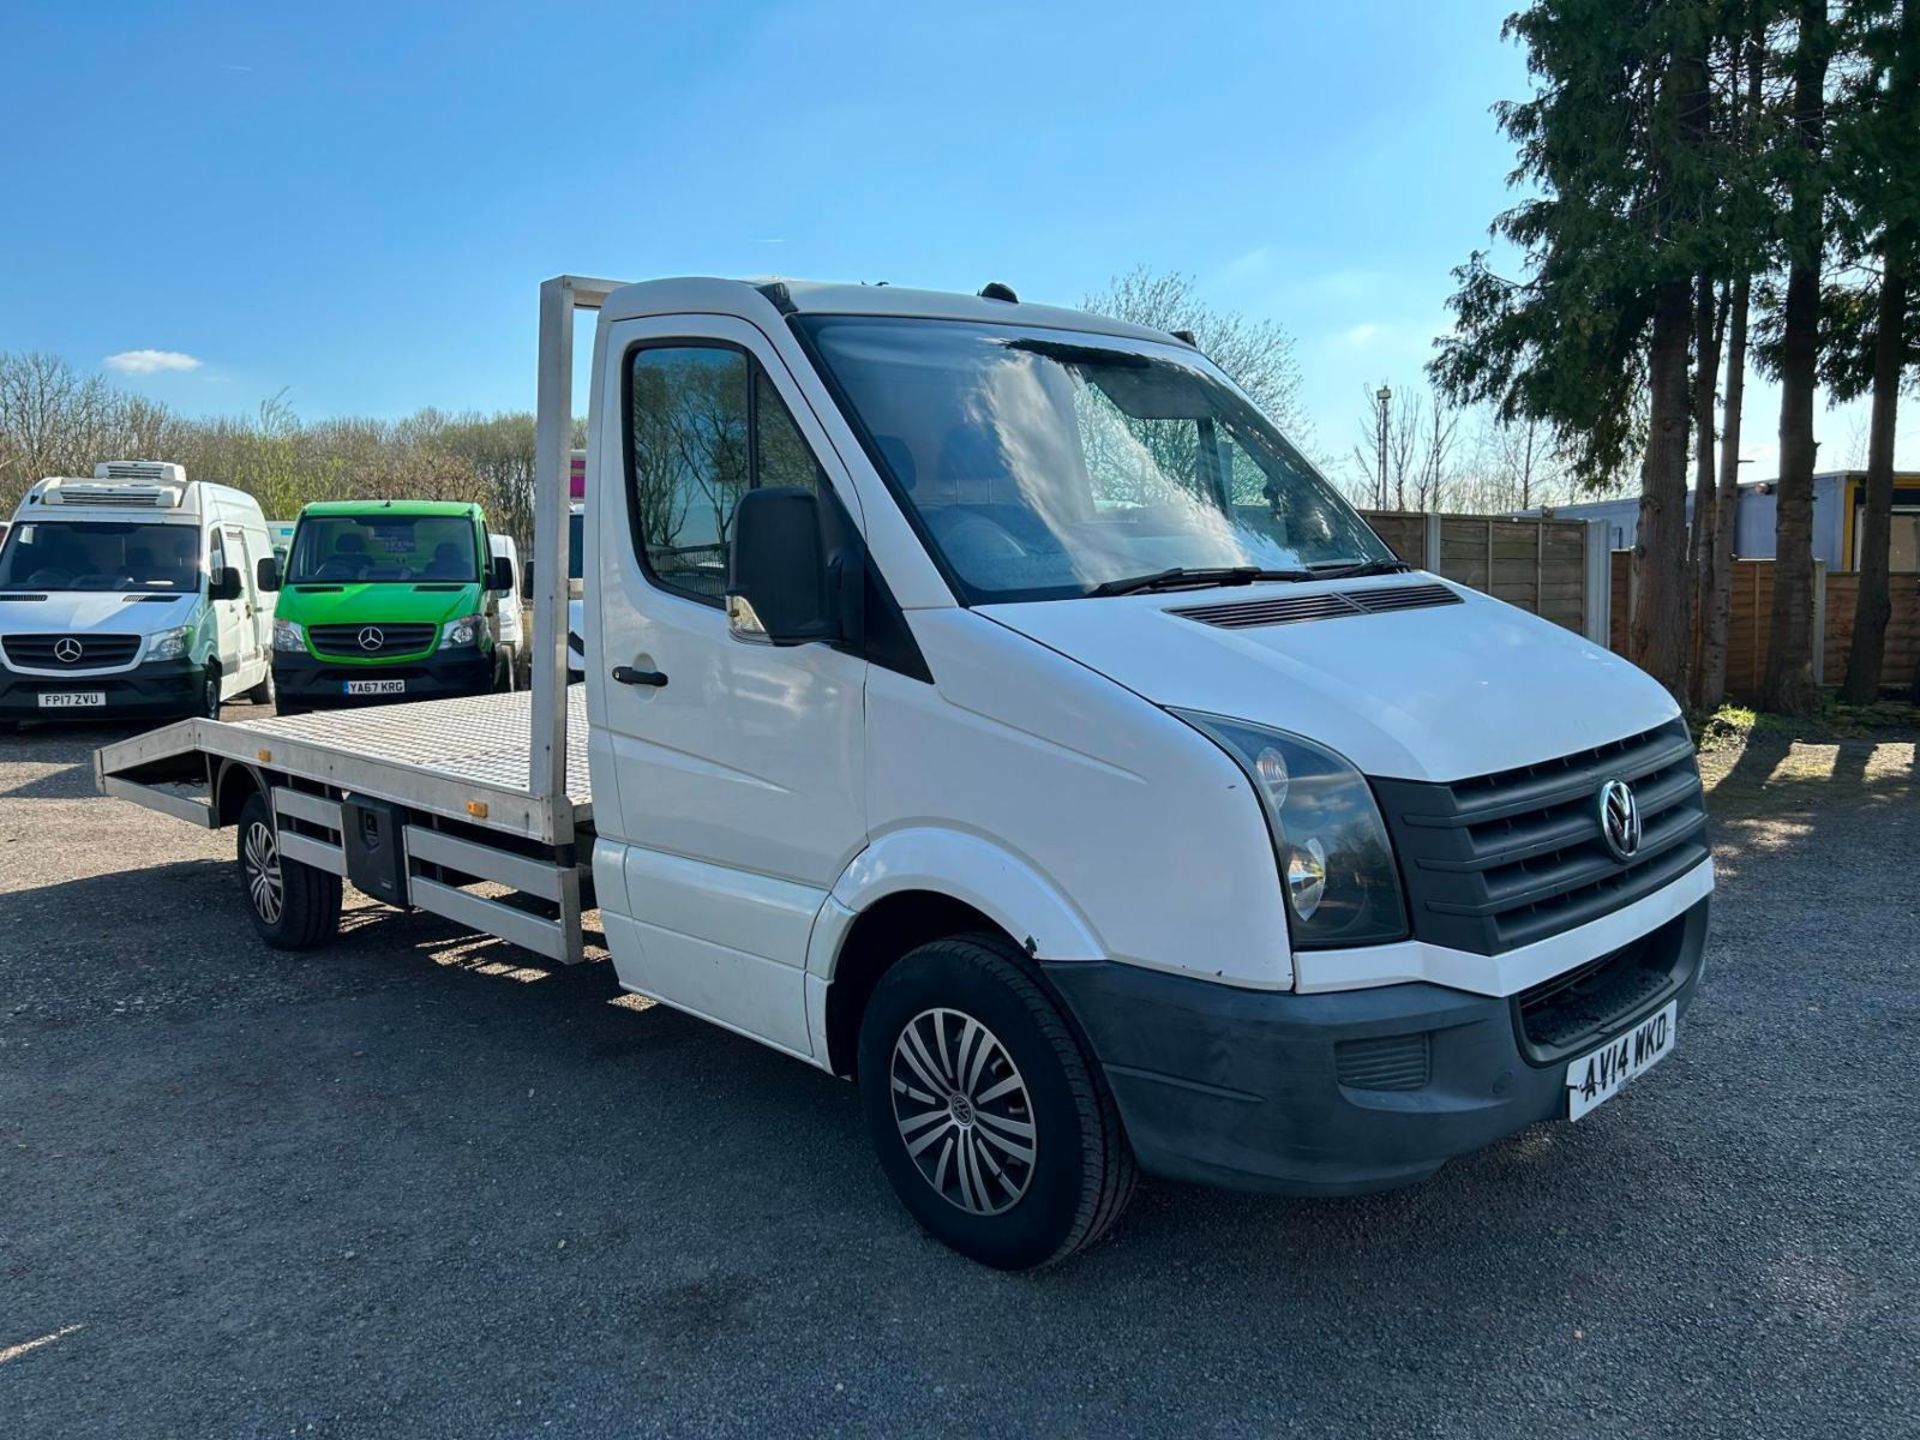 2014 VOLKSWAGEN CRAFTER CR35 TDI 136BHP - RELIABLE LONG WHEEL BASE 17FT RECOVERY VEHICLE